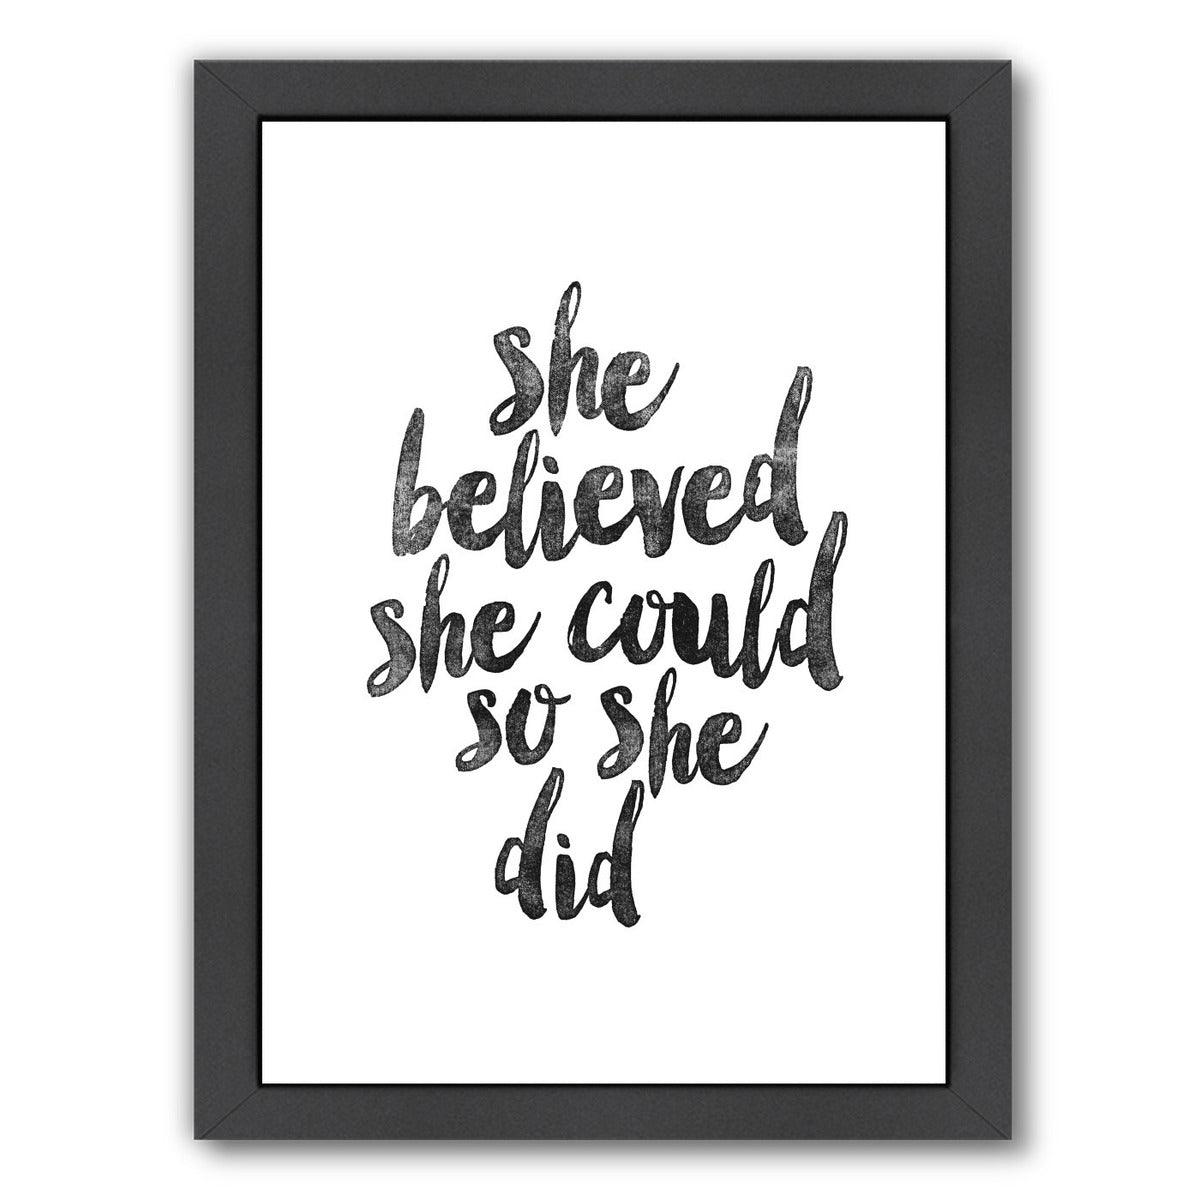 She Believed She Could So She Did by Motivated Type Framed Print - Americanflat